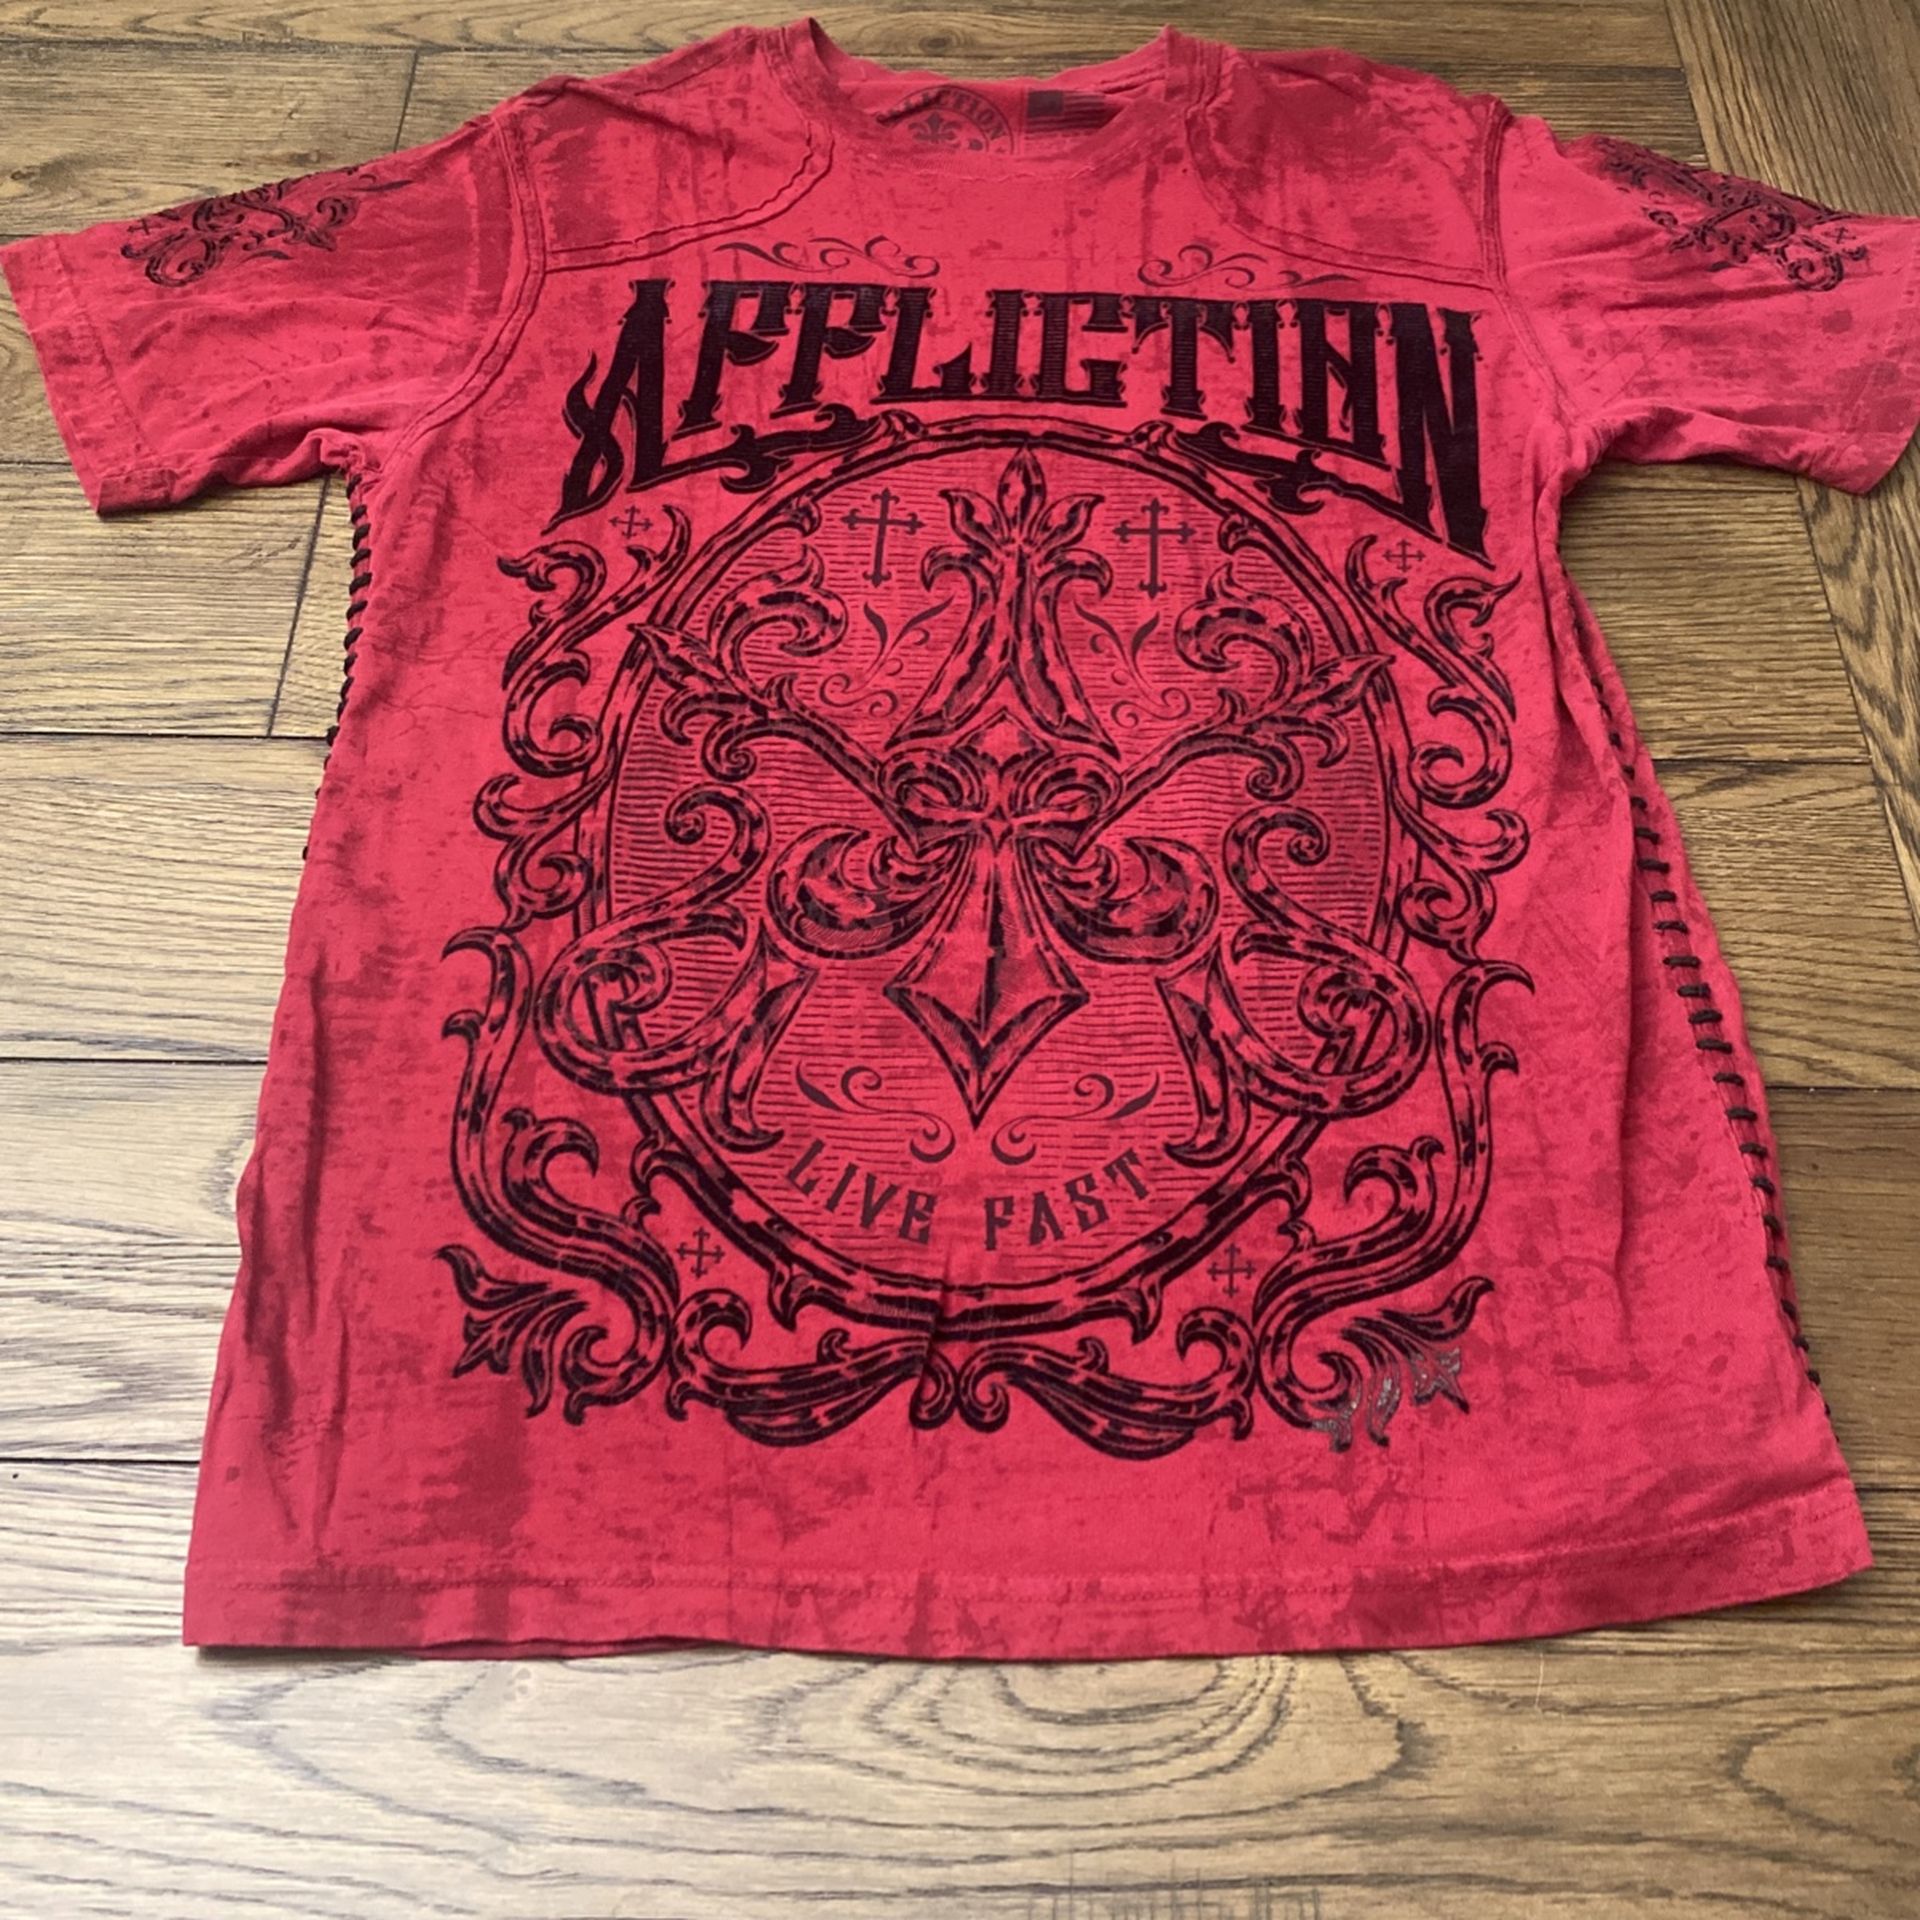 Affliction Men’s Size Small 